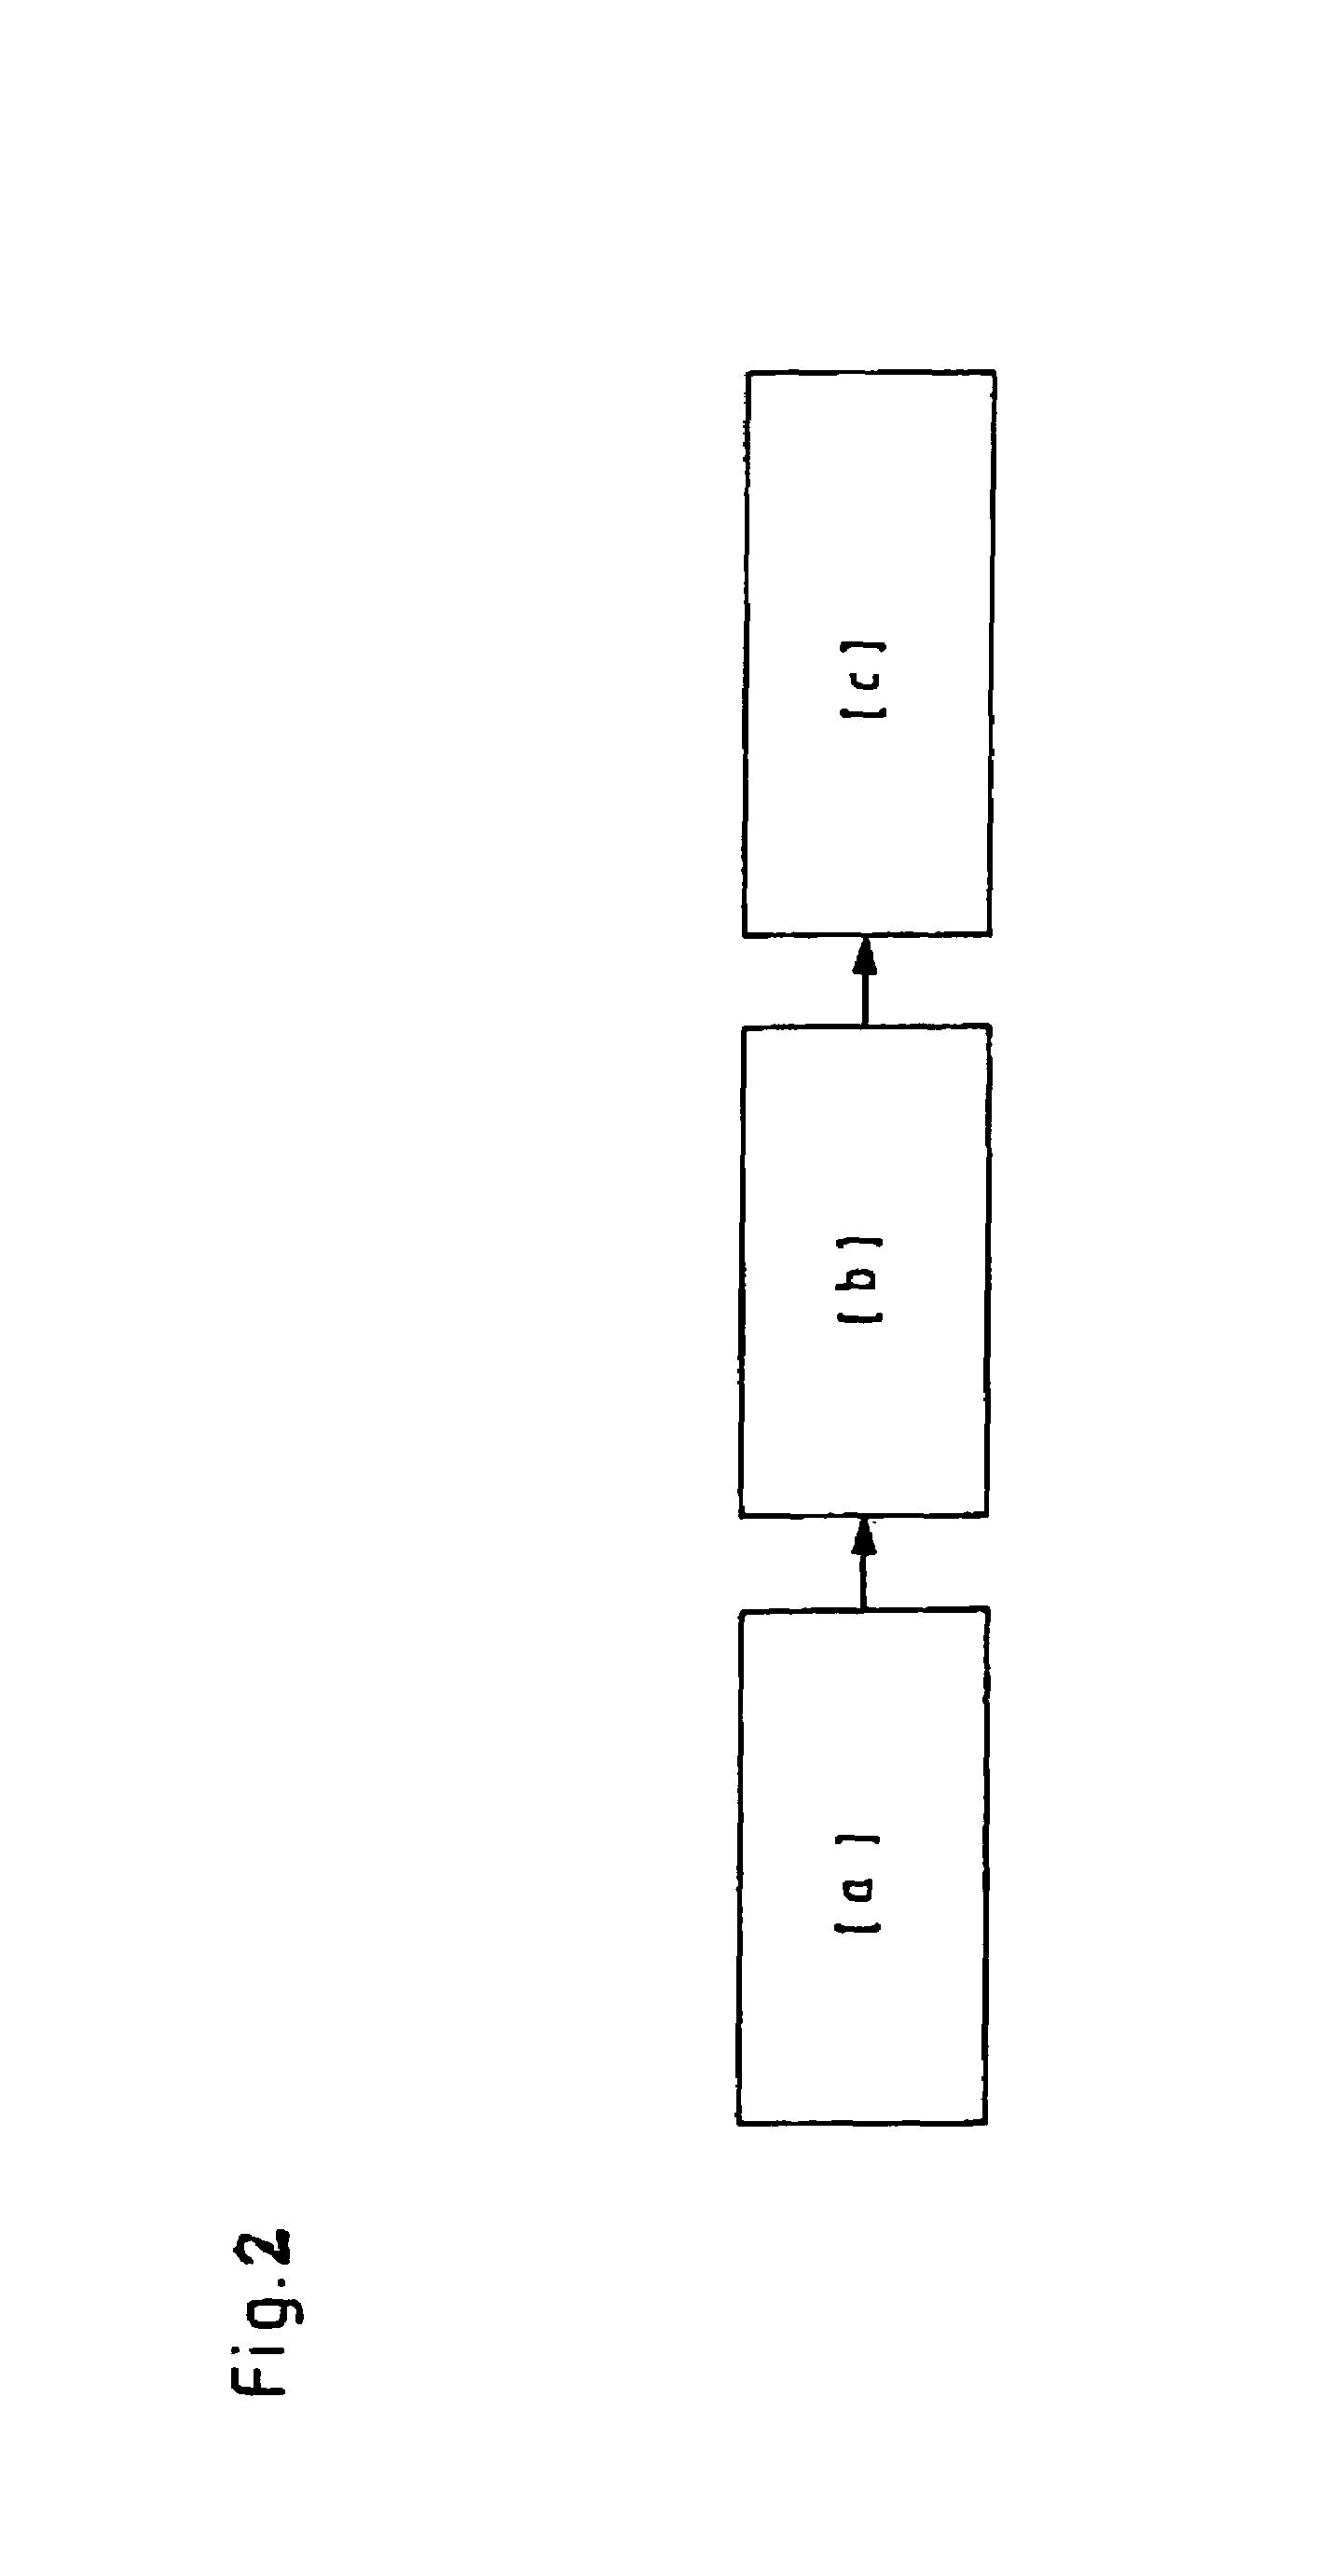 Method of adjusting filter parameters and an associated playback system